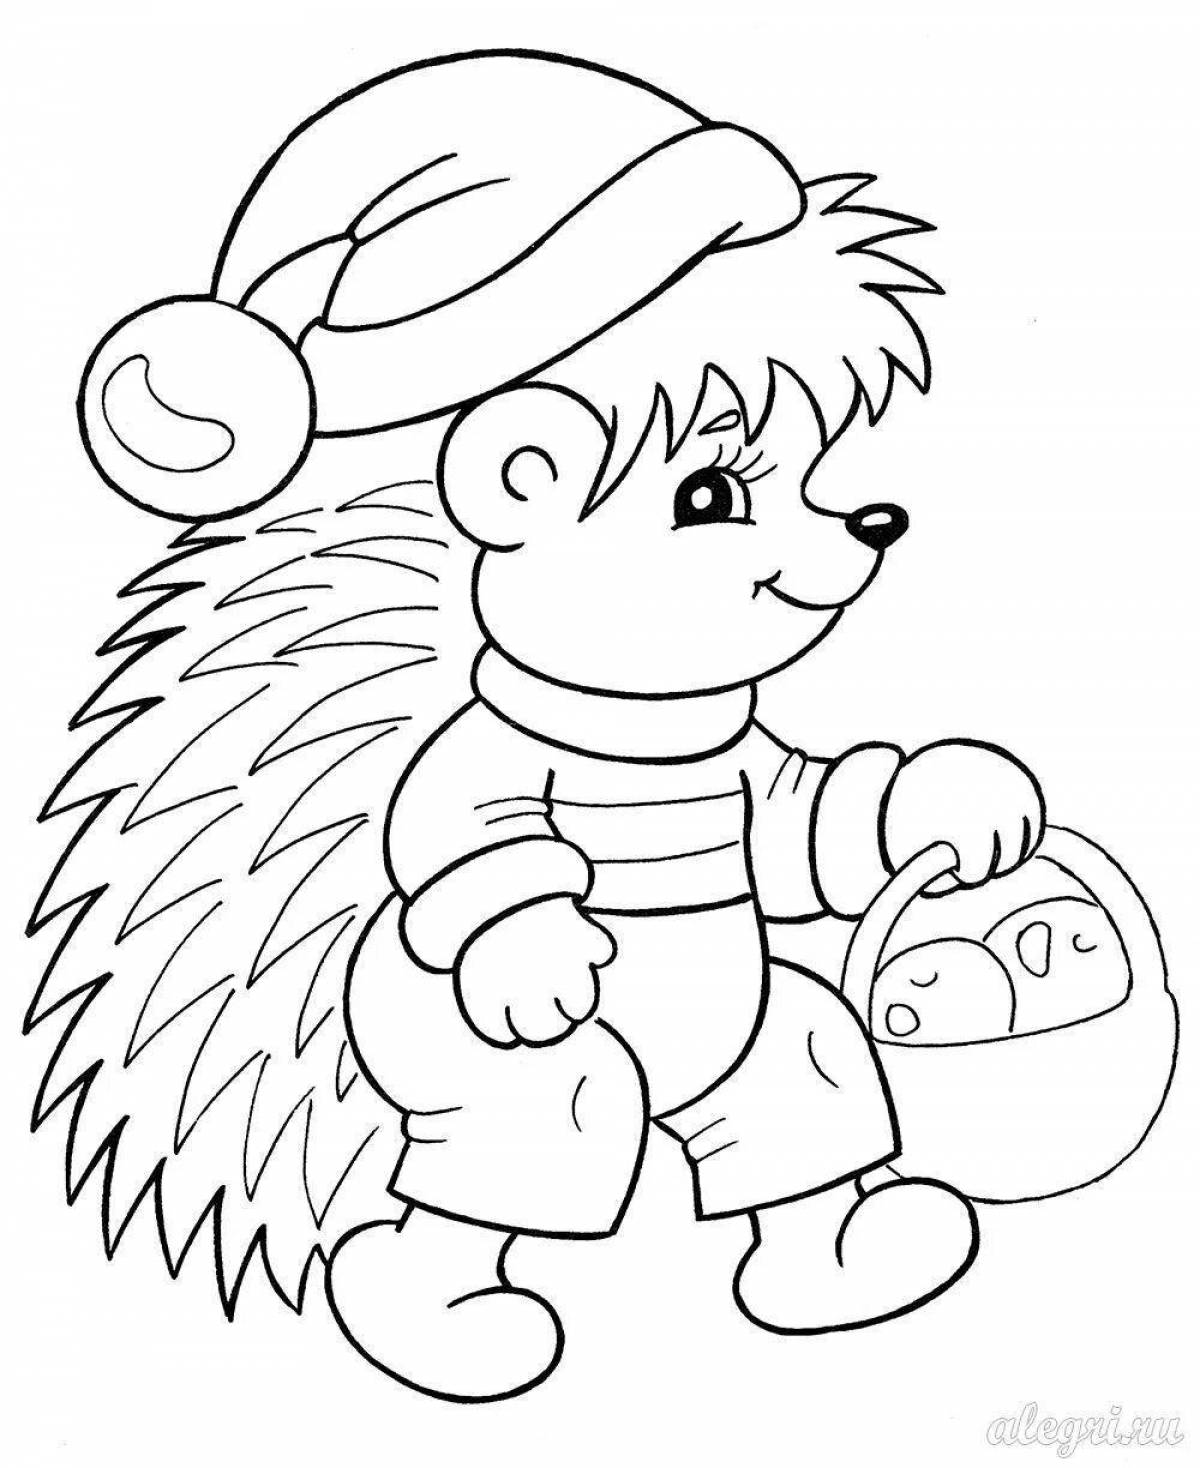 Adorable hedgehog coloring book for little ones